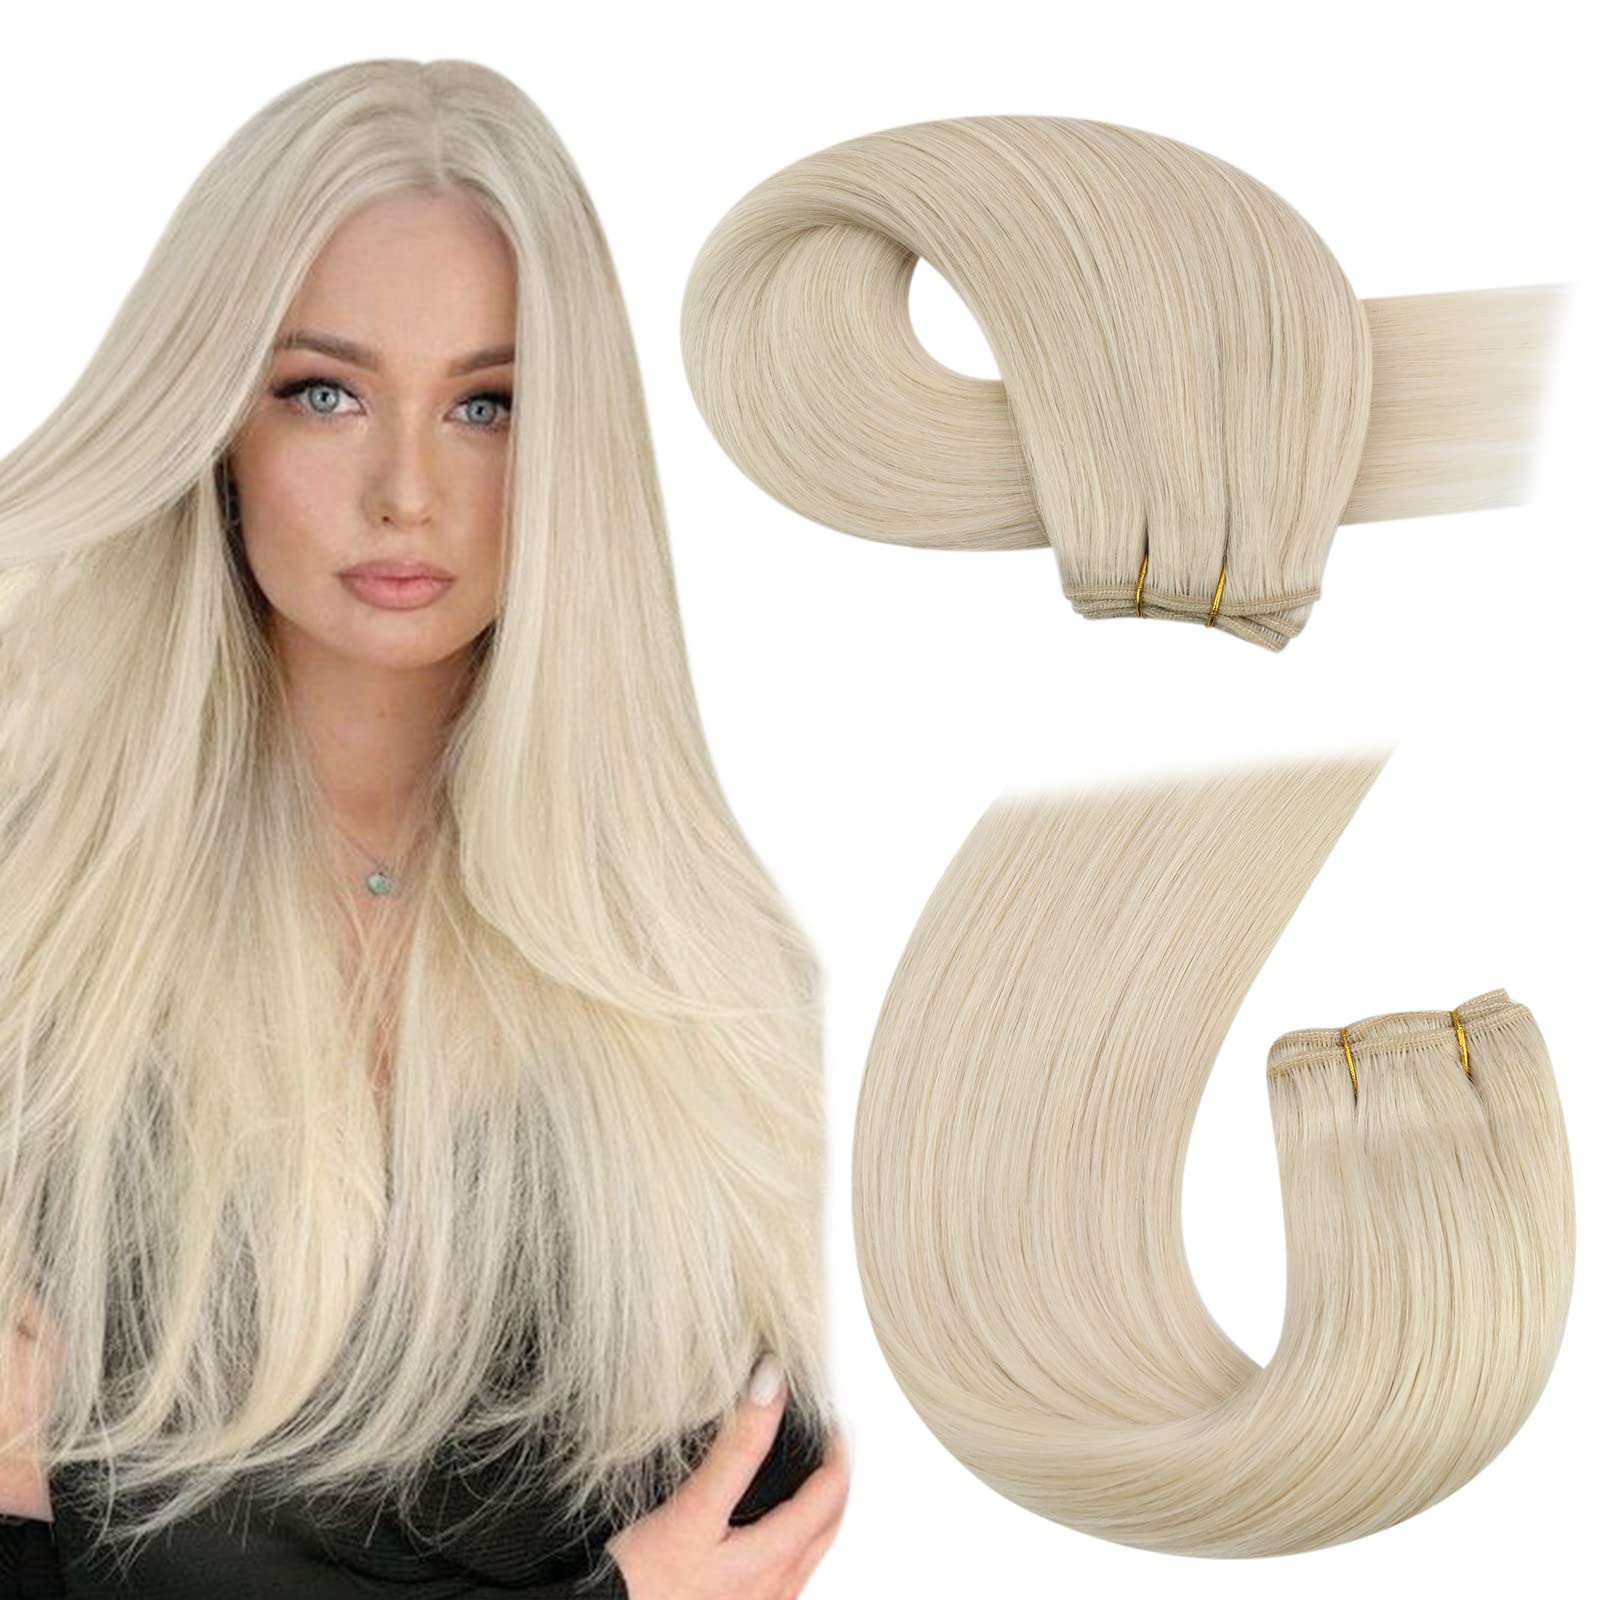 Micro Beaded Weft Extensions Professional Platinum Blonde #60|LaaVoo 16in / 150g | 3 Bundles (Recommend) / Platinum Blonde